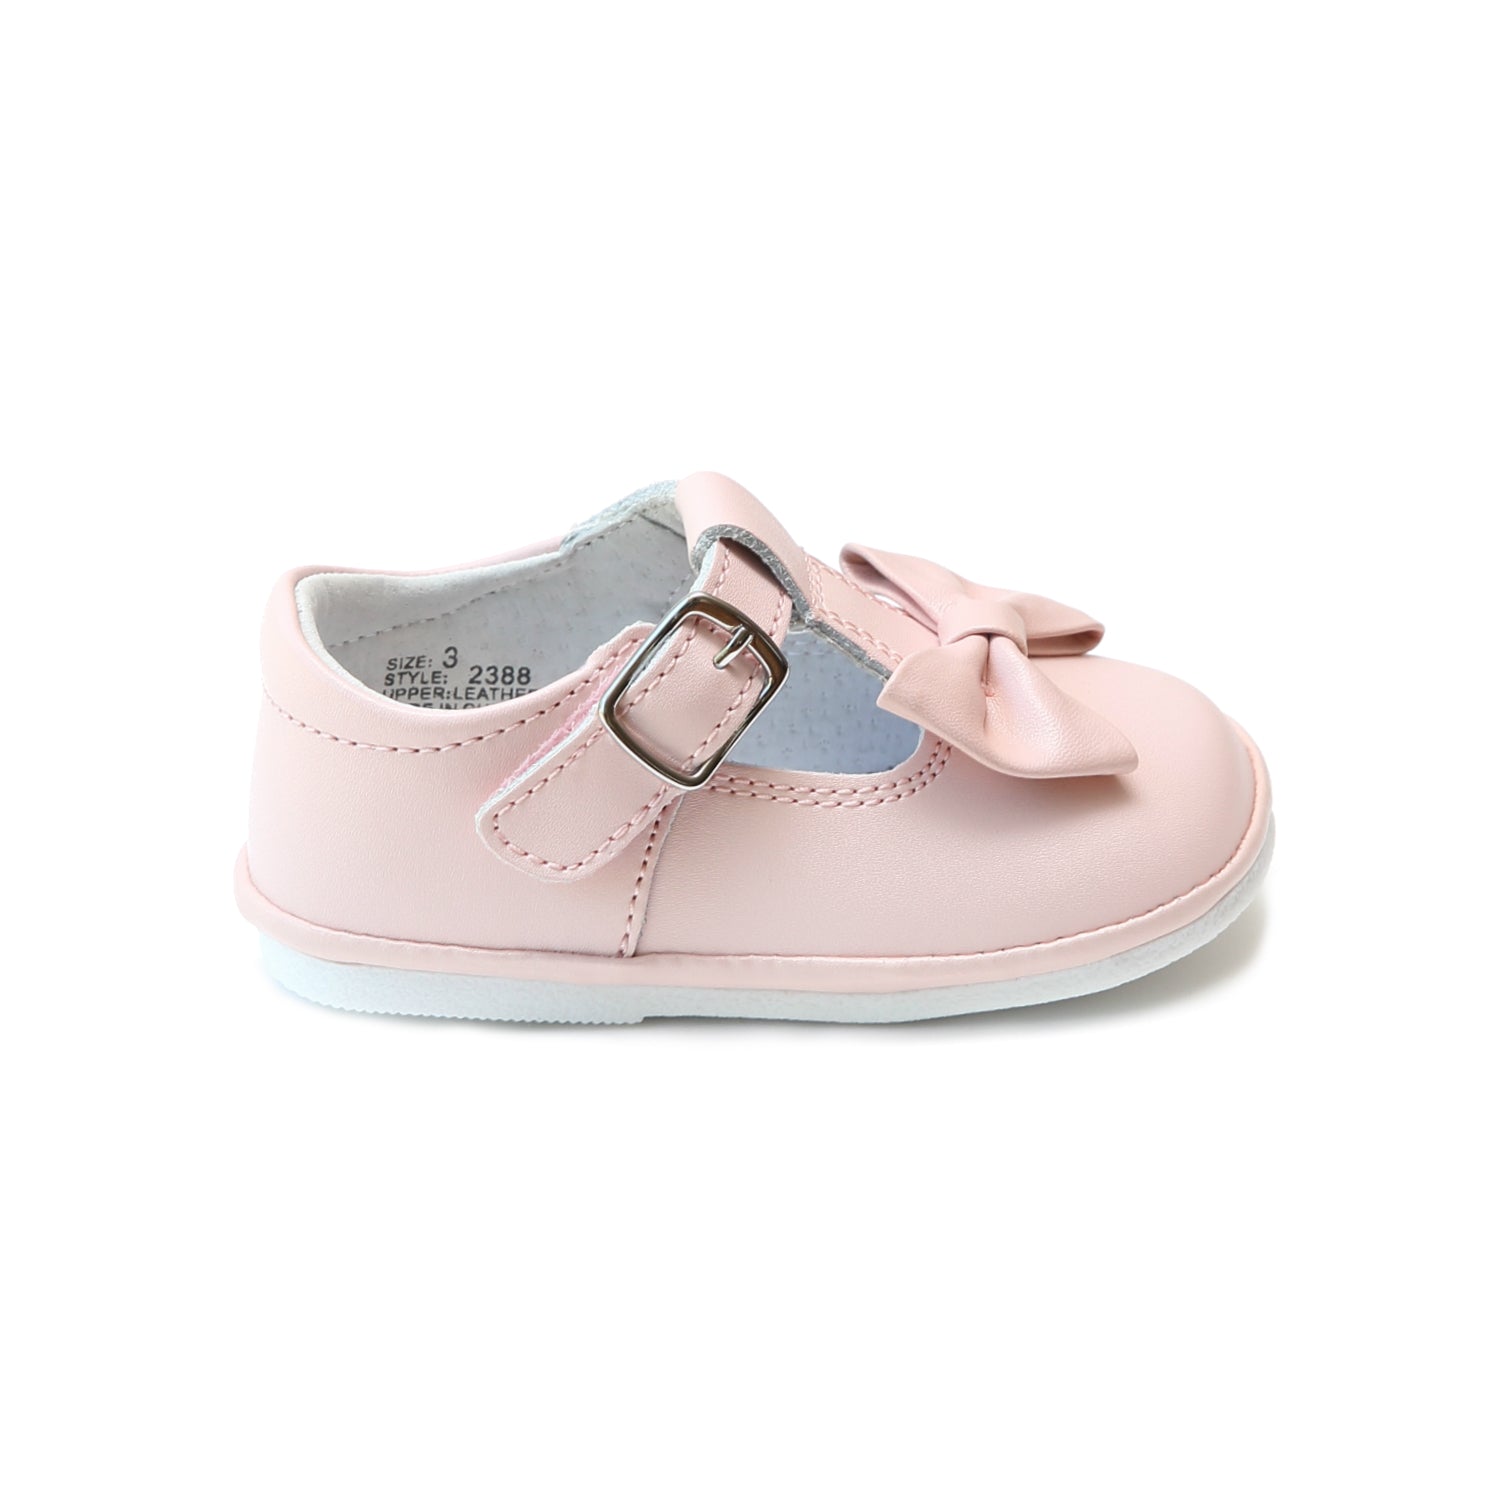 Minnie Bow Leather Mary Jane - Babies & Toddlers